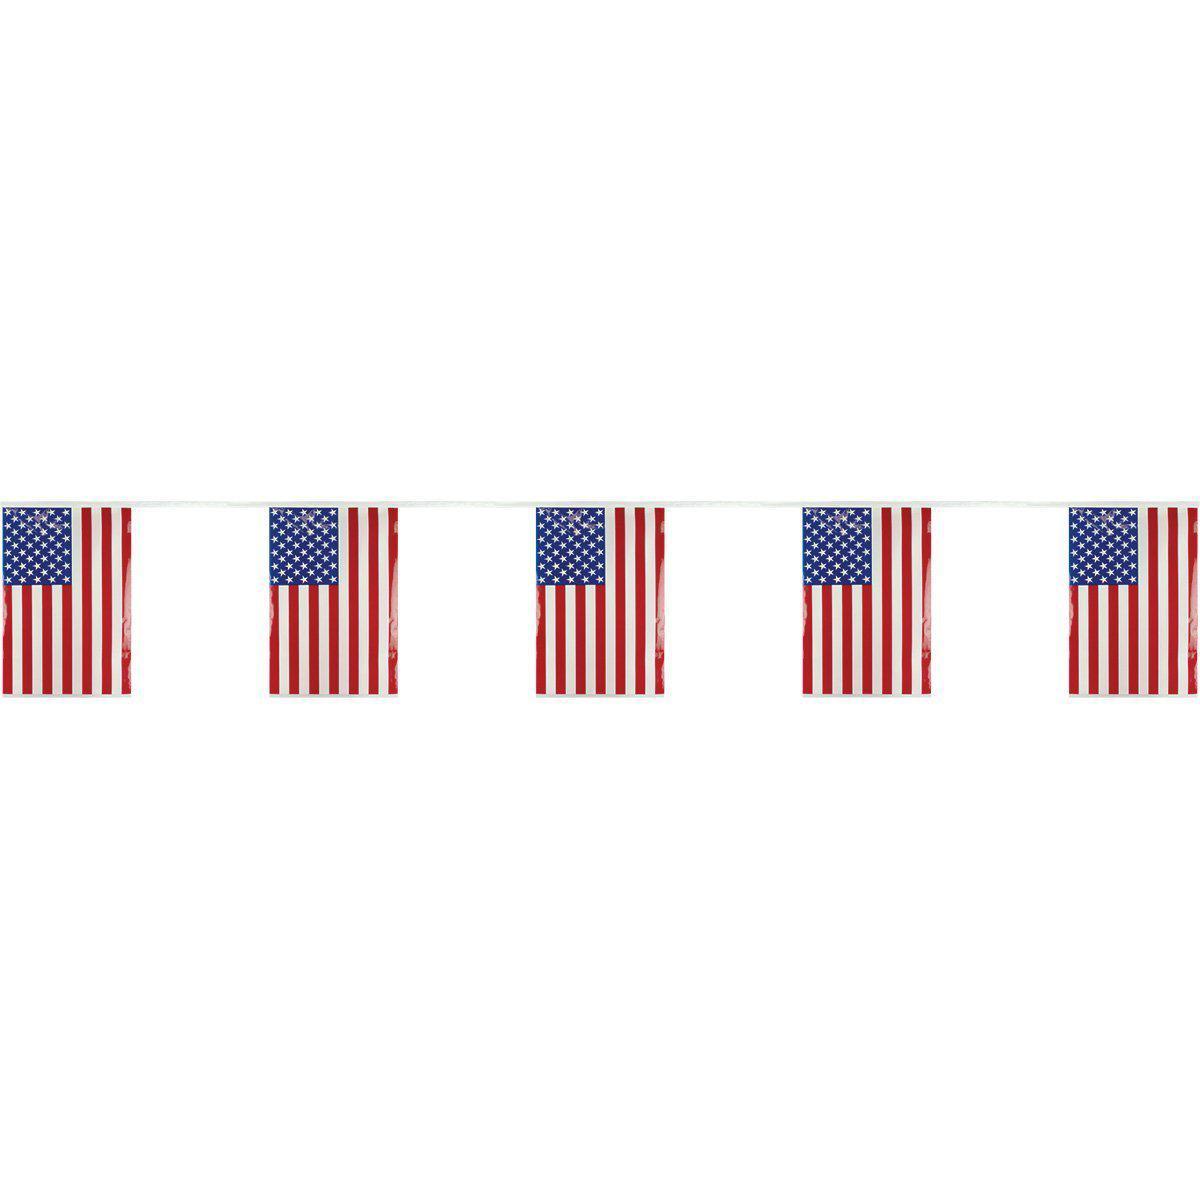 U.S. Flag Pennant Strings from Fly Me Flag